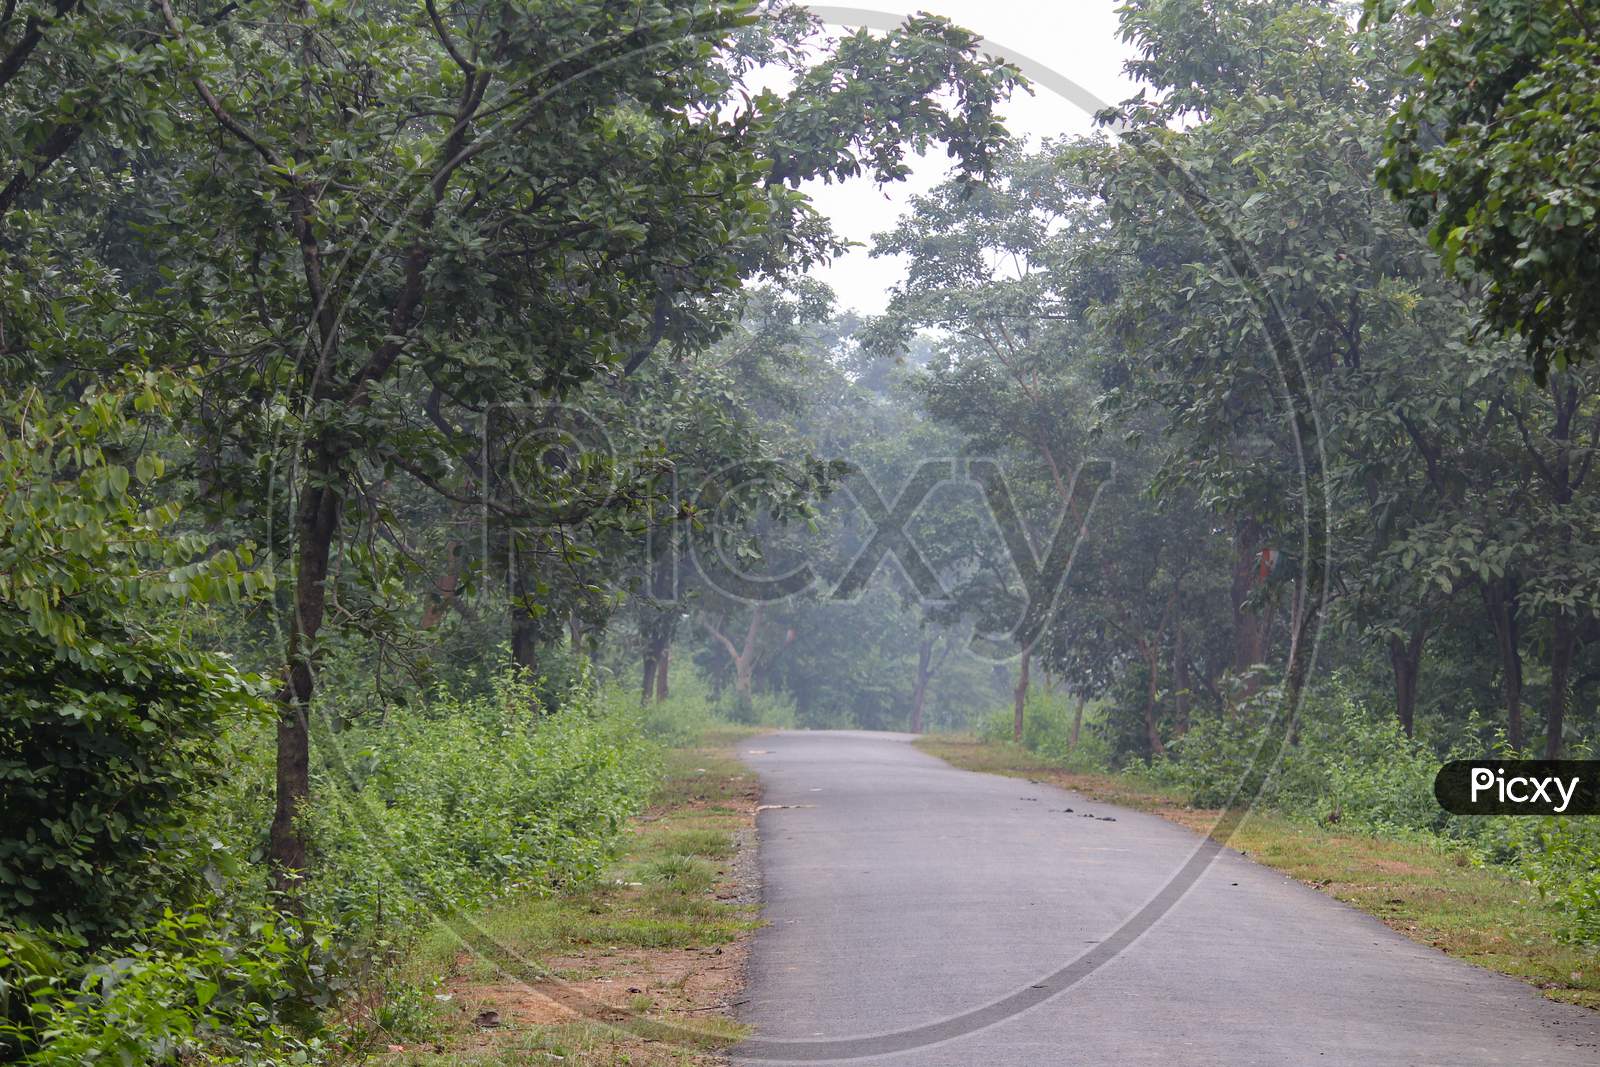 Empty Road Through Forest Surrounded With Trees